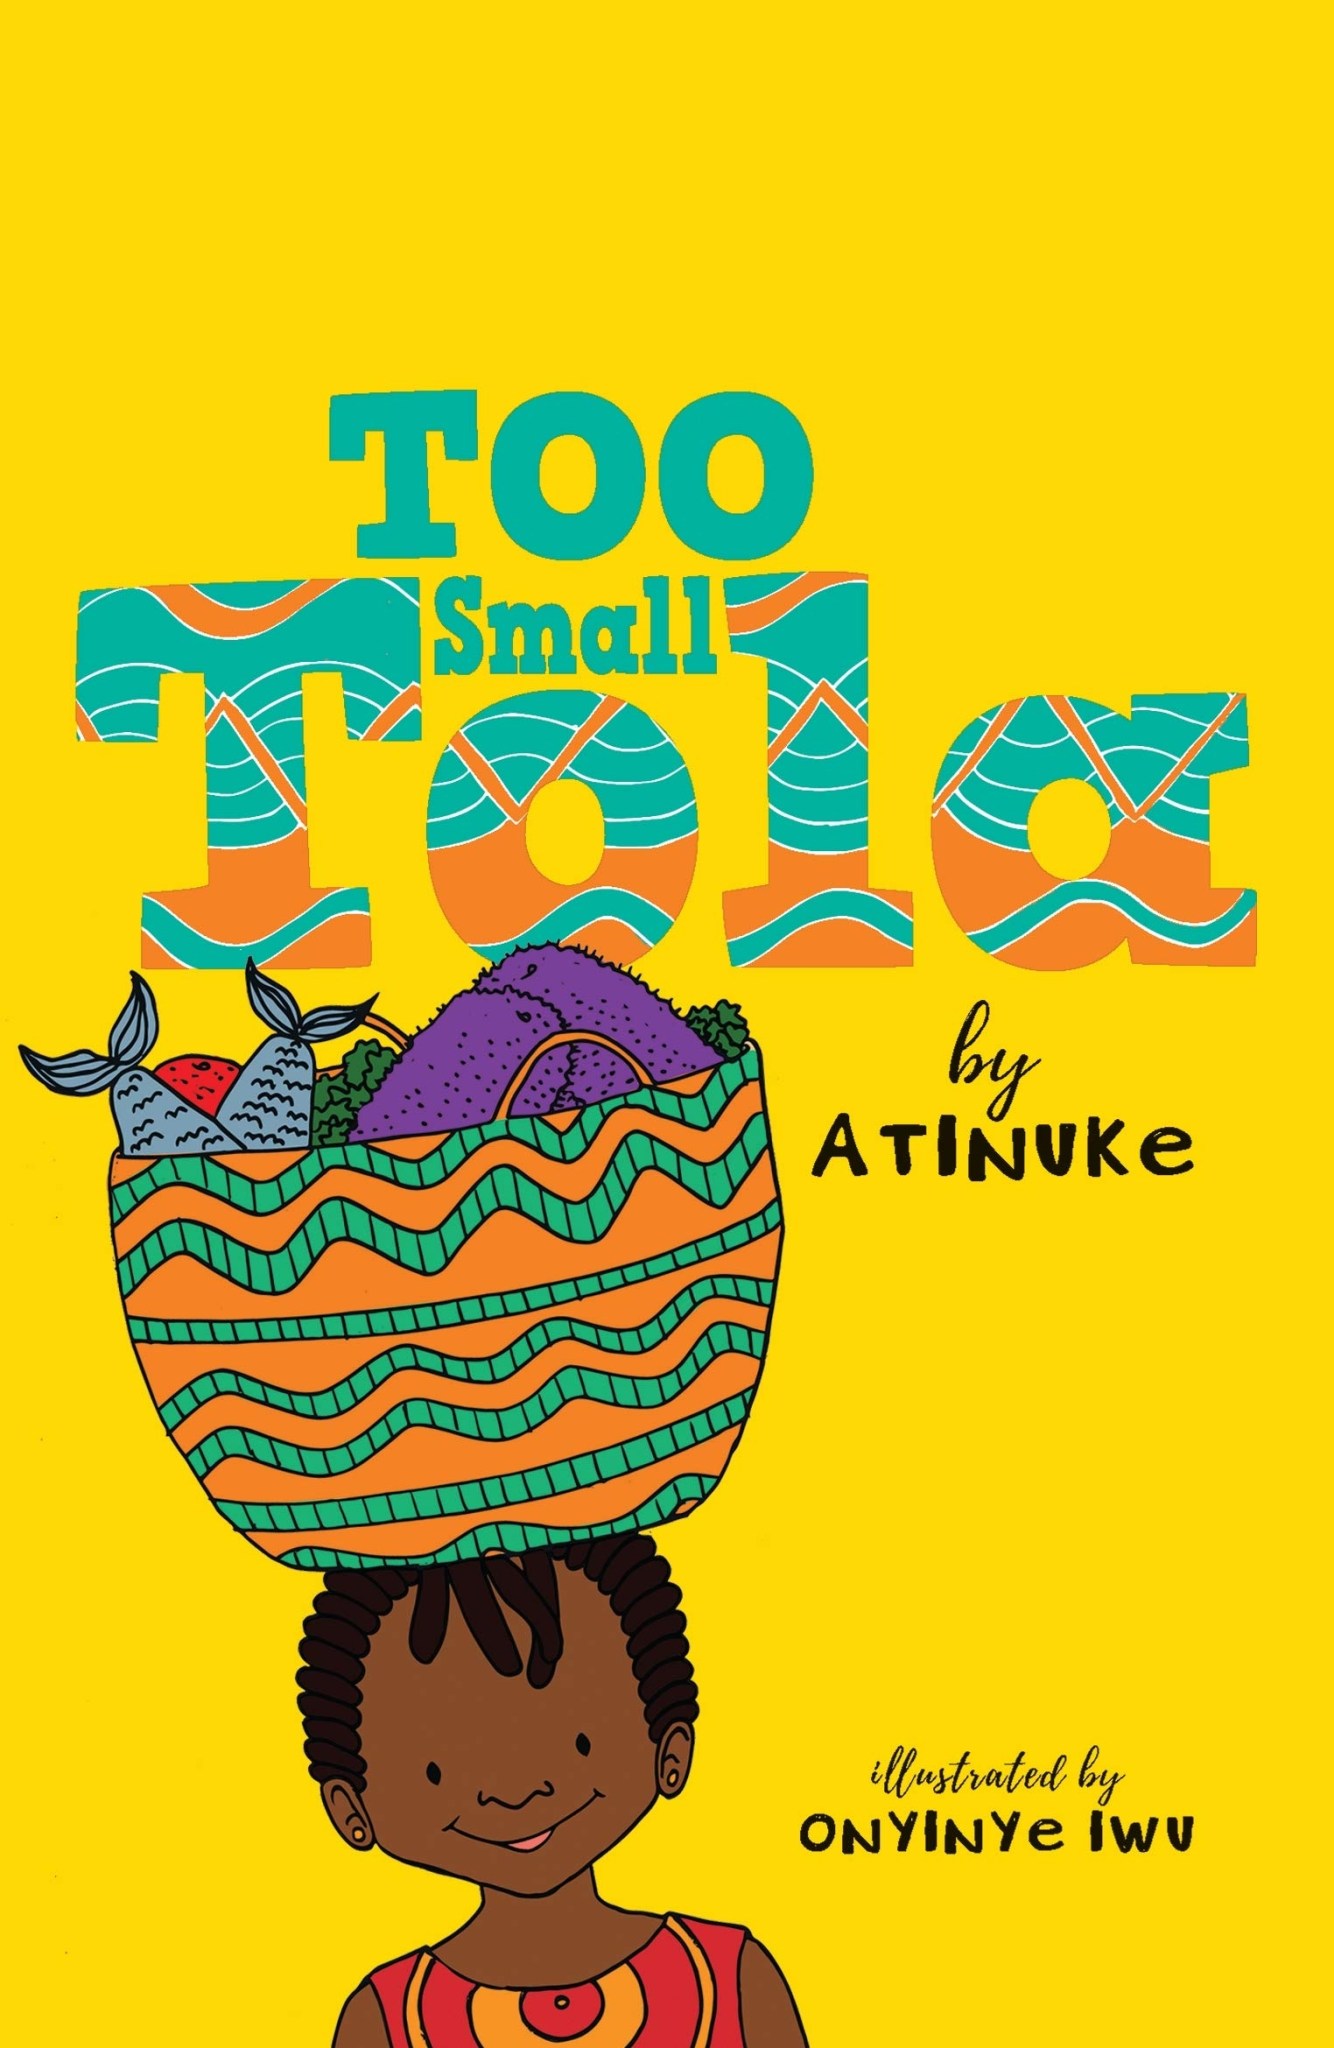 Cover of Too Small Tola featuring an illustration of a young small girl with a colorful orange and green basket on her head with fish and produce in it. The cover's background is bright yellow and the book's title is displayed in a patterned teal and orange.